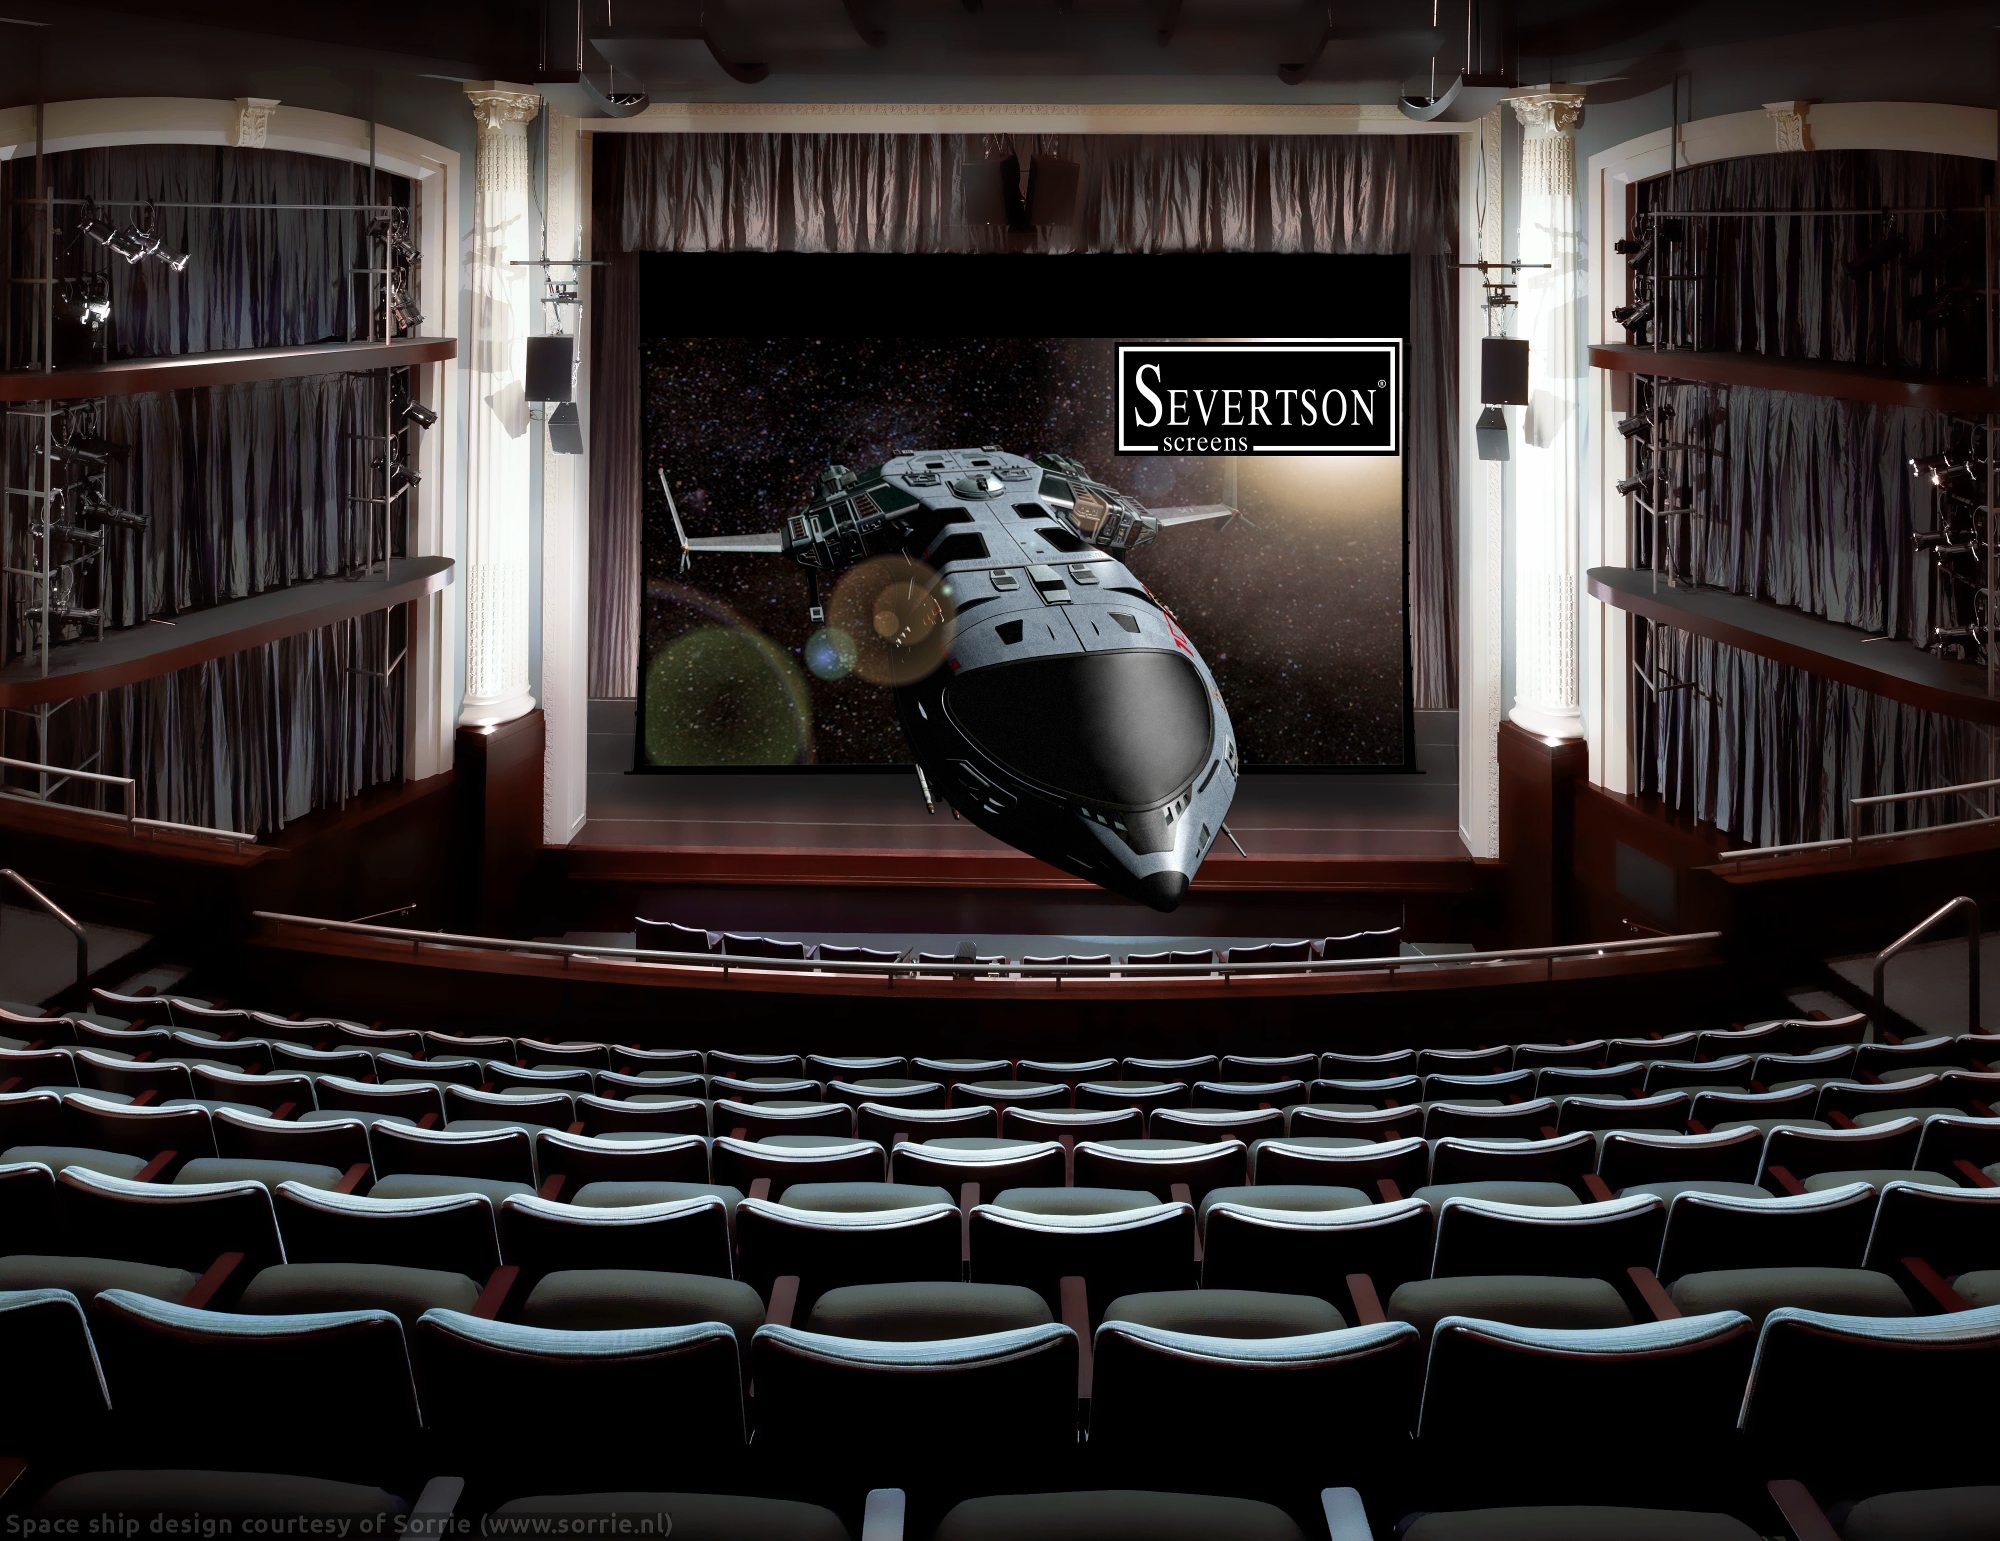 Severtson Screens' Giant Electric motorized screens with SeVision 3D GX coating are like a retractable cinema screen, perfect for any venue with a large stage.